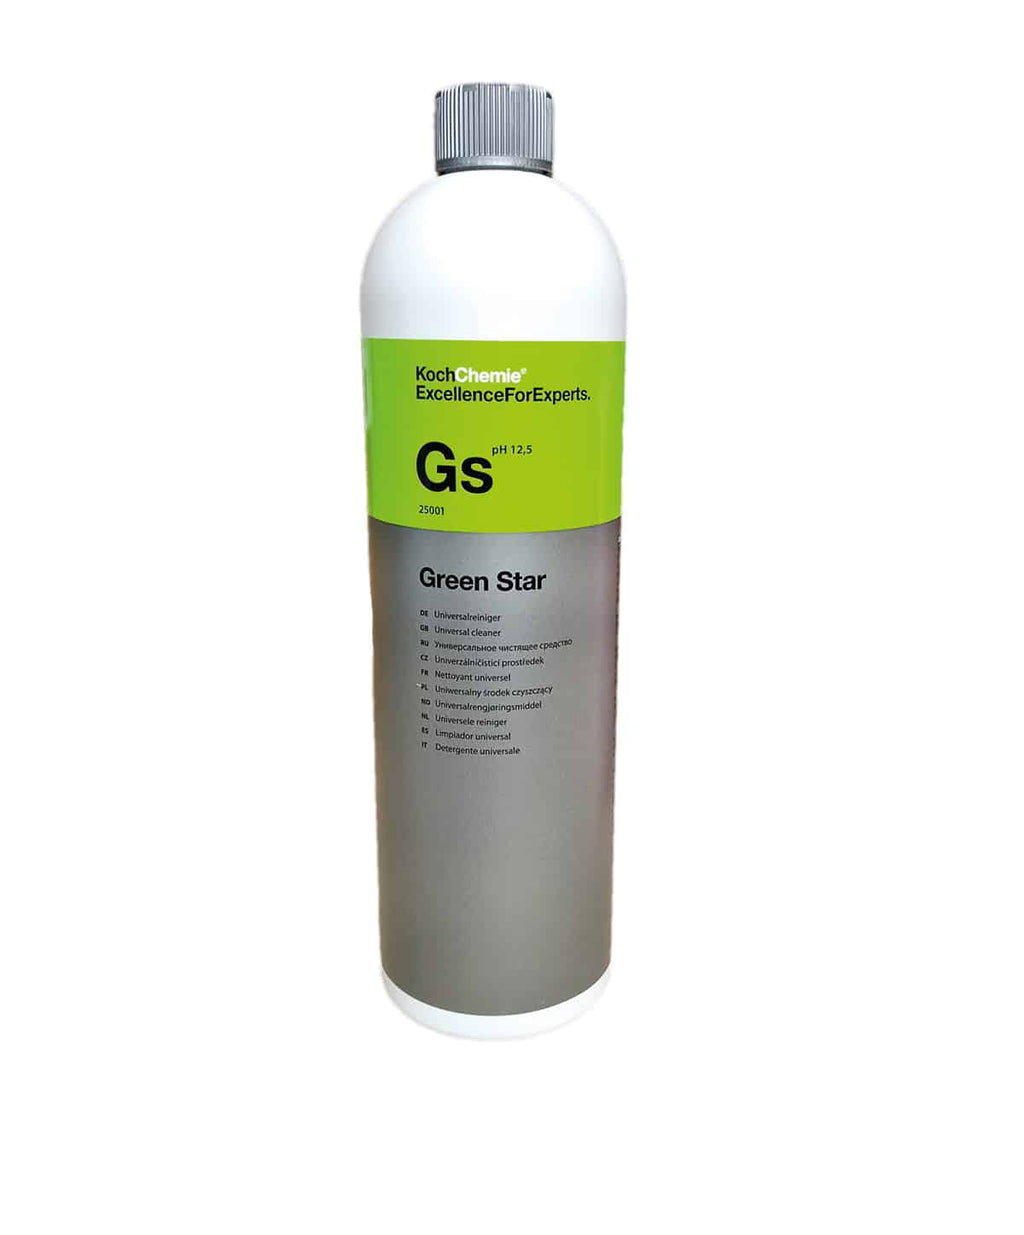 GS Green Star: Your Best Universal Cleaner - Koch Chemie